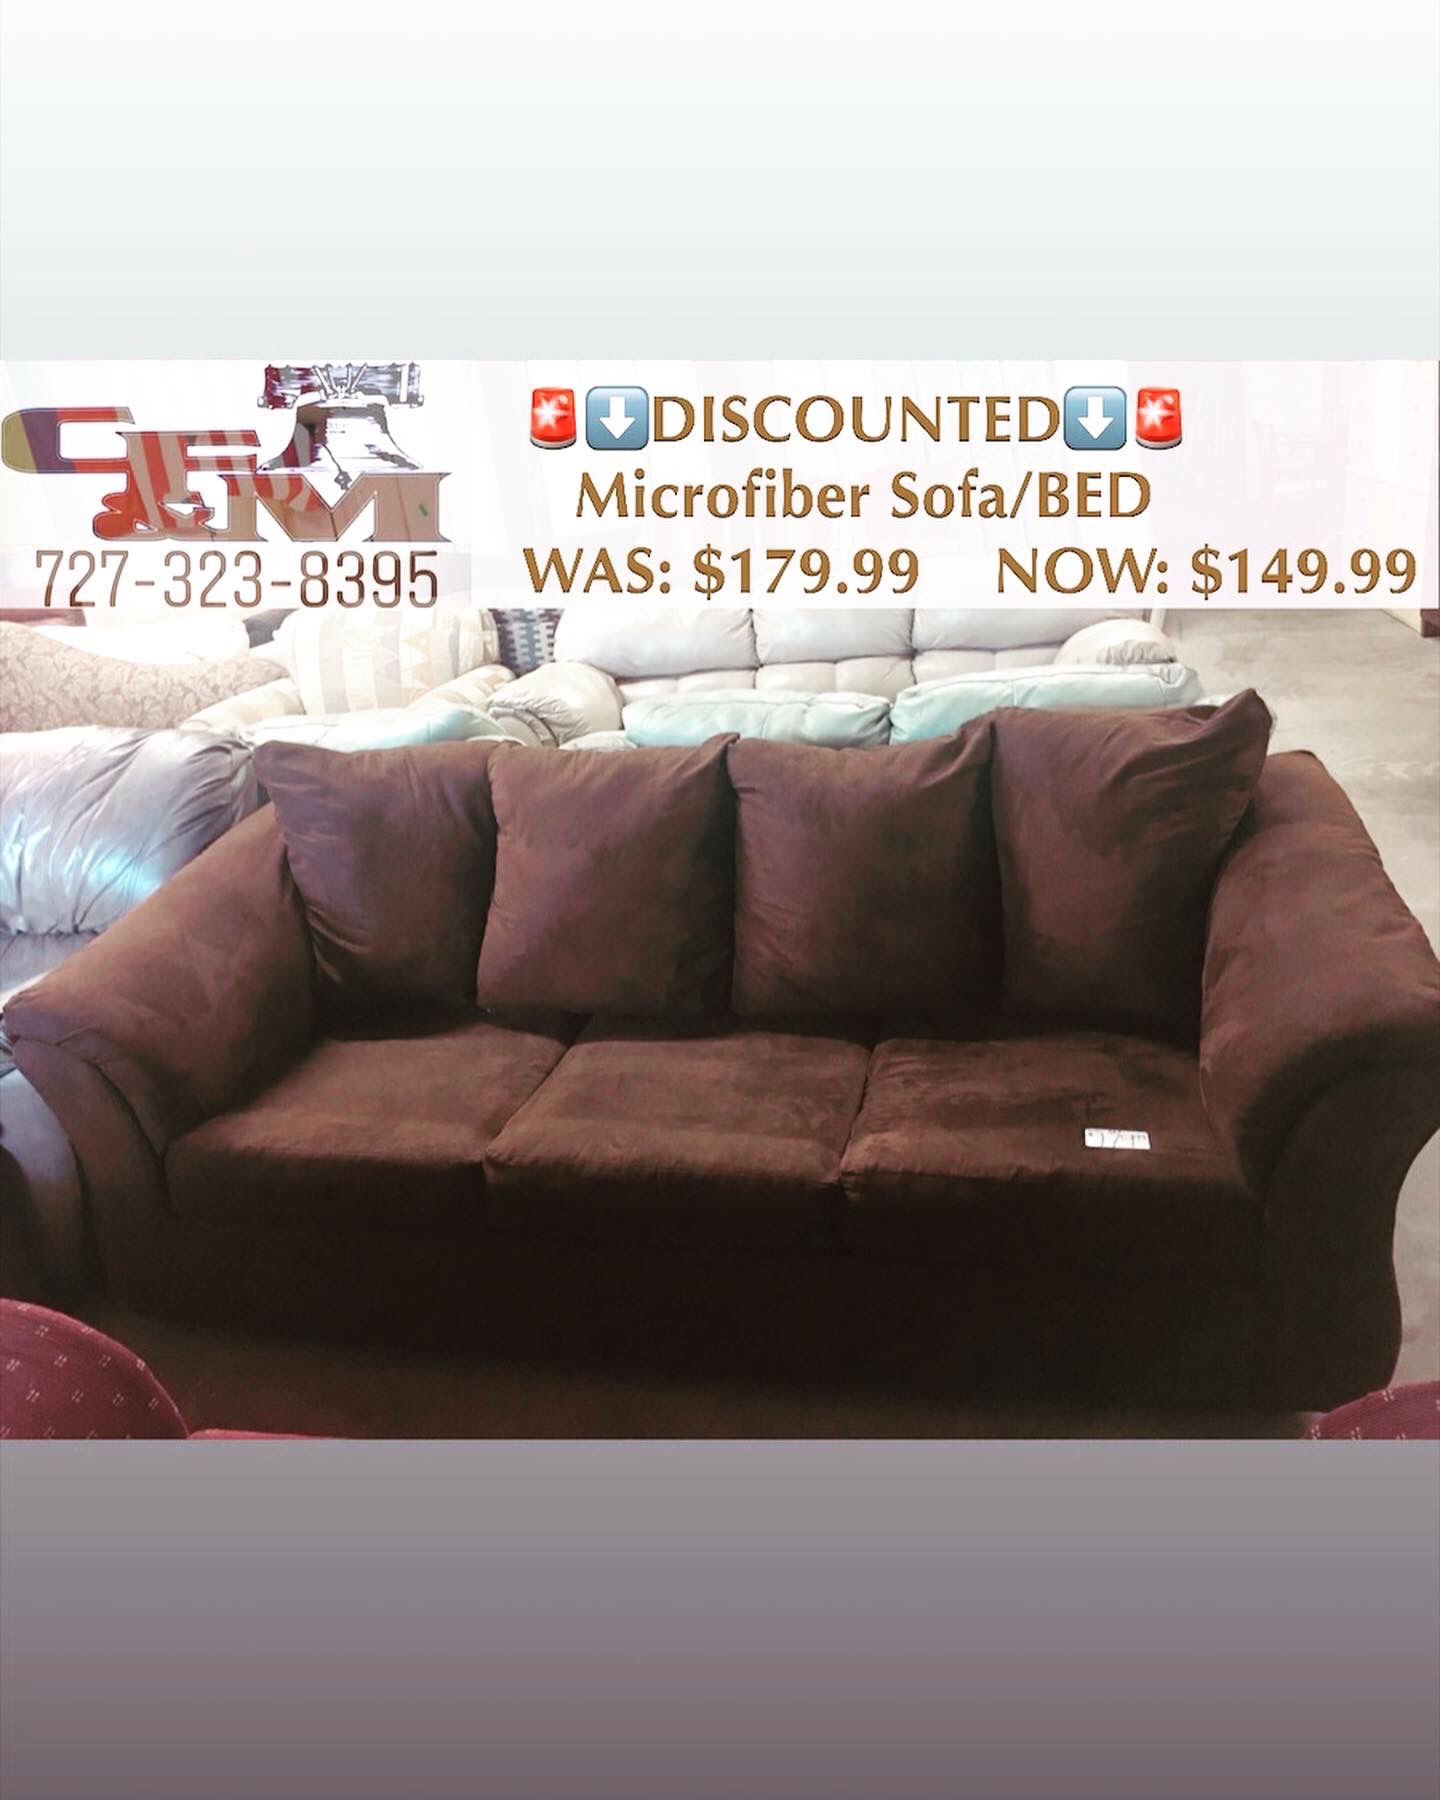 Sofa-Bed ONLY $149.99 (FREE DELIVERY) Within 10 mile radius